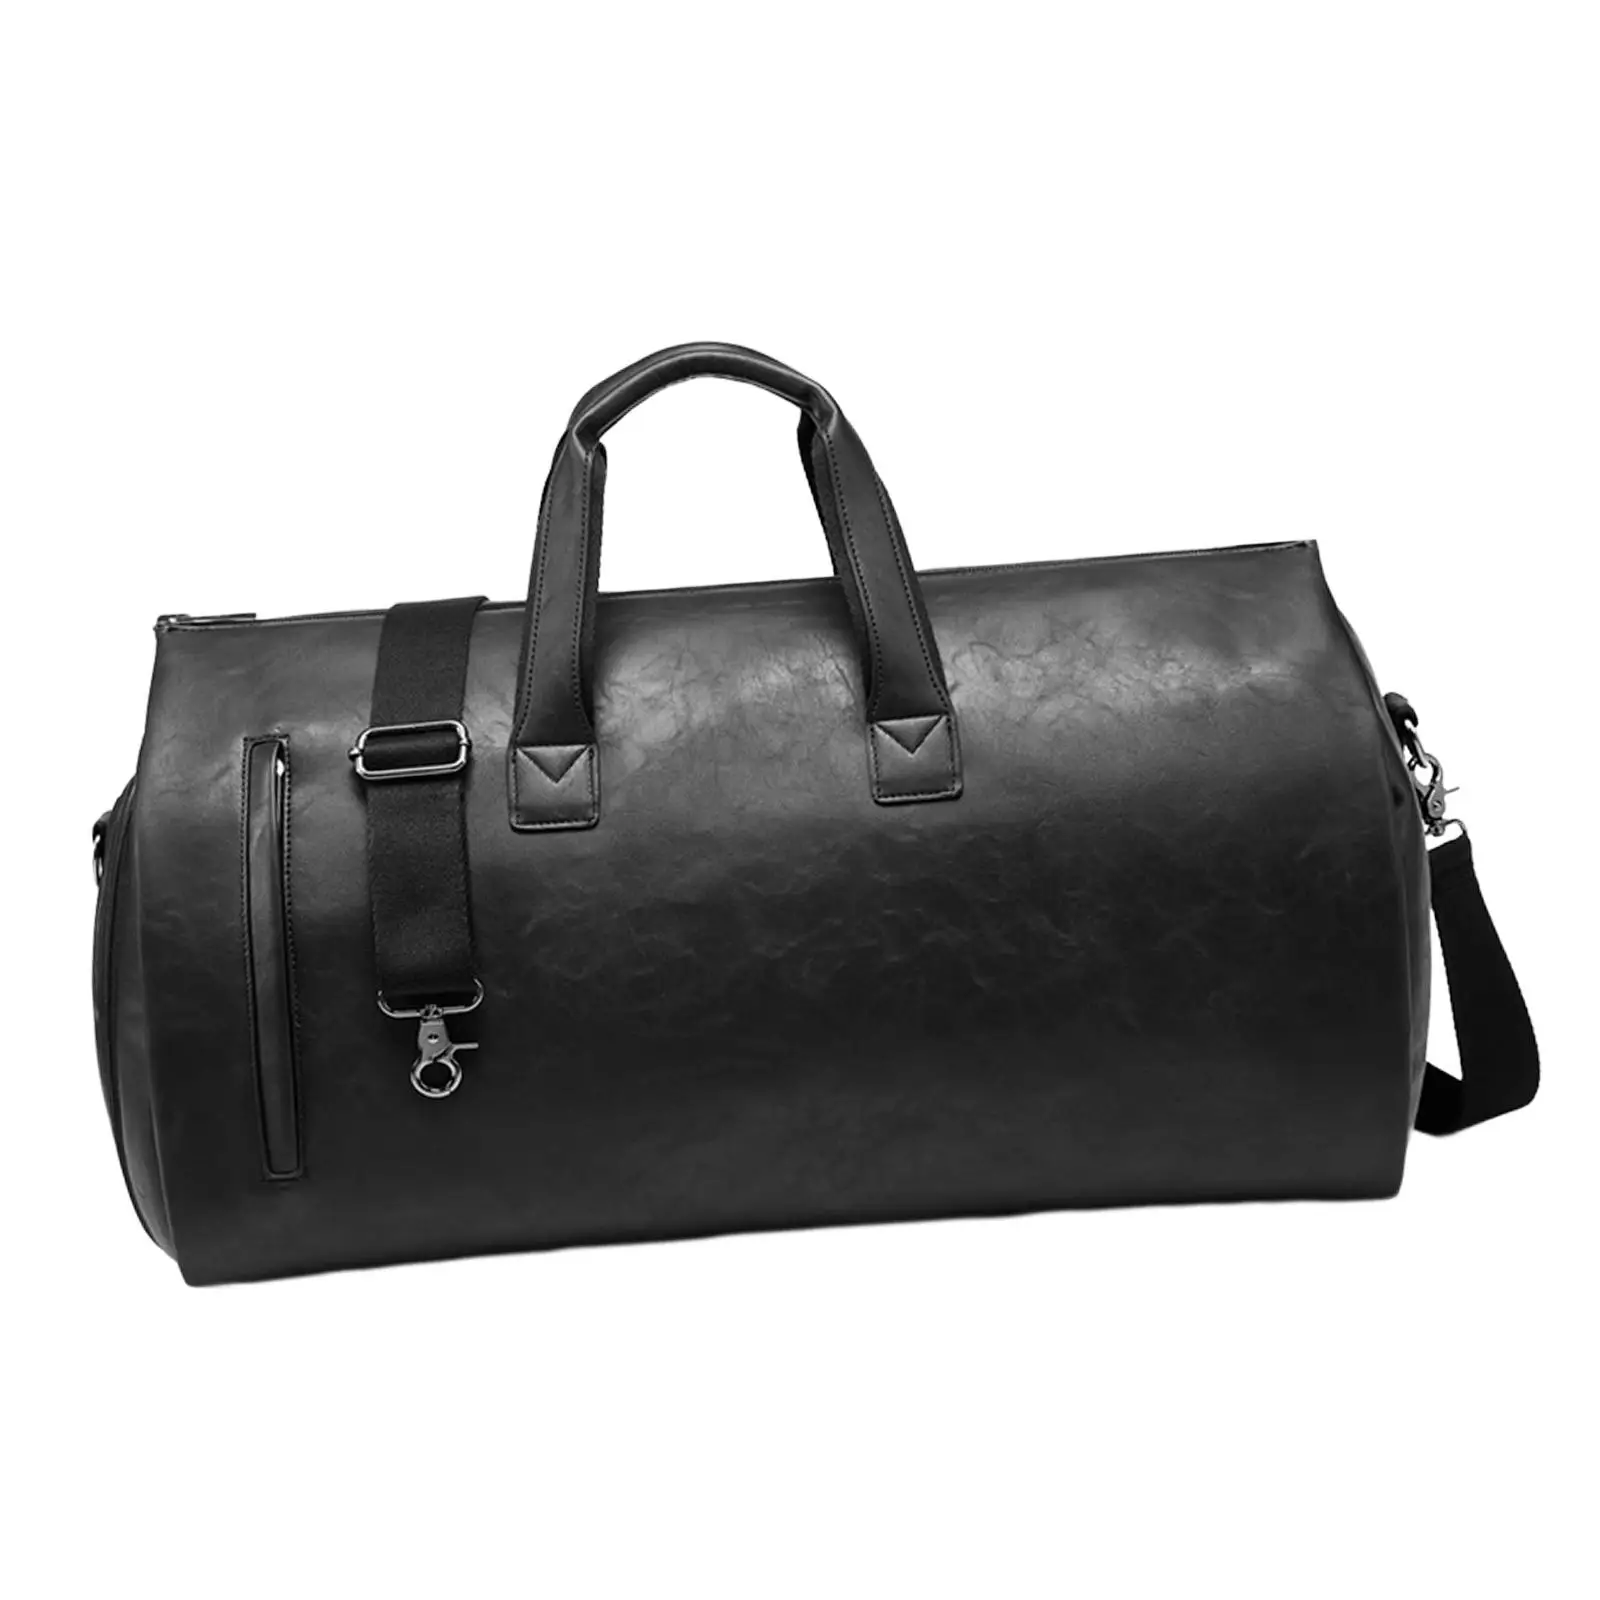 Leather Duffle Bag Water Resistant Carry on Bag Business Travel Bag for Men